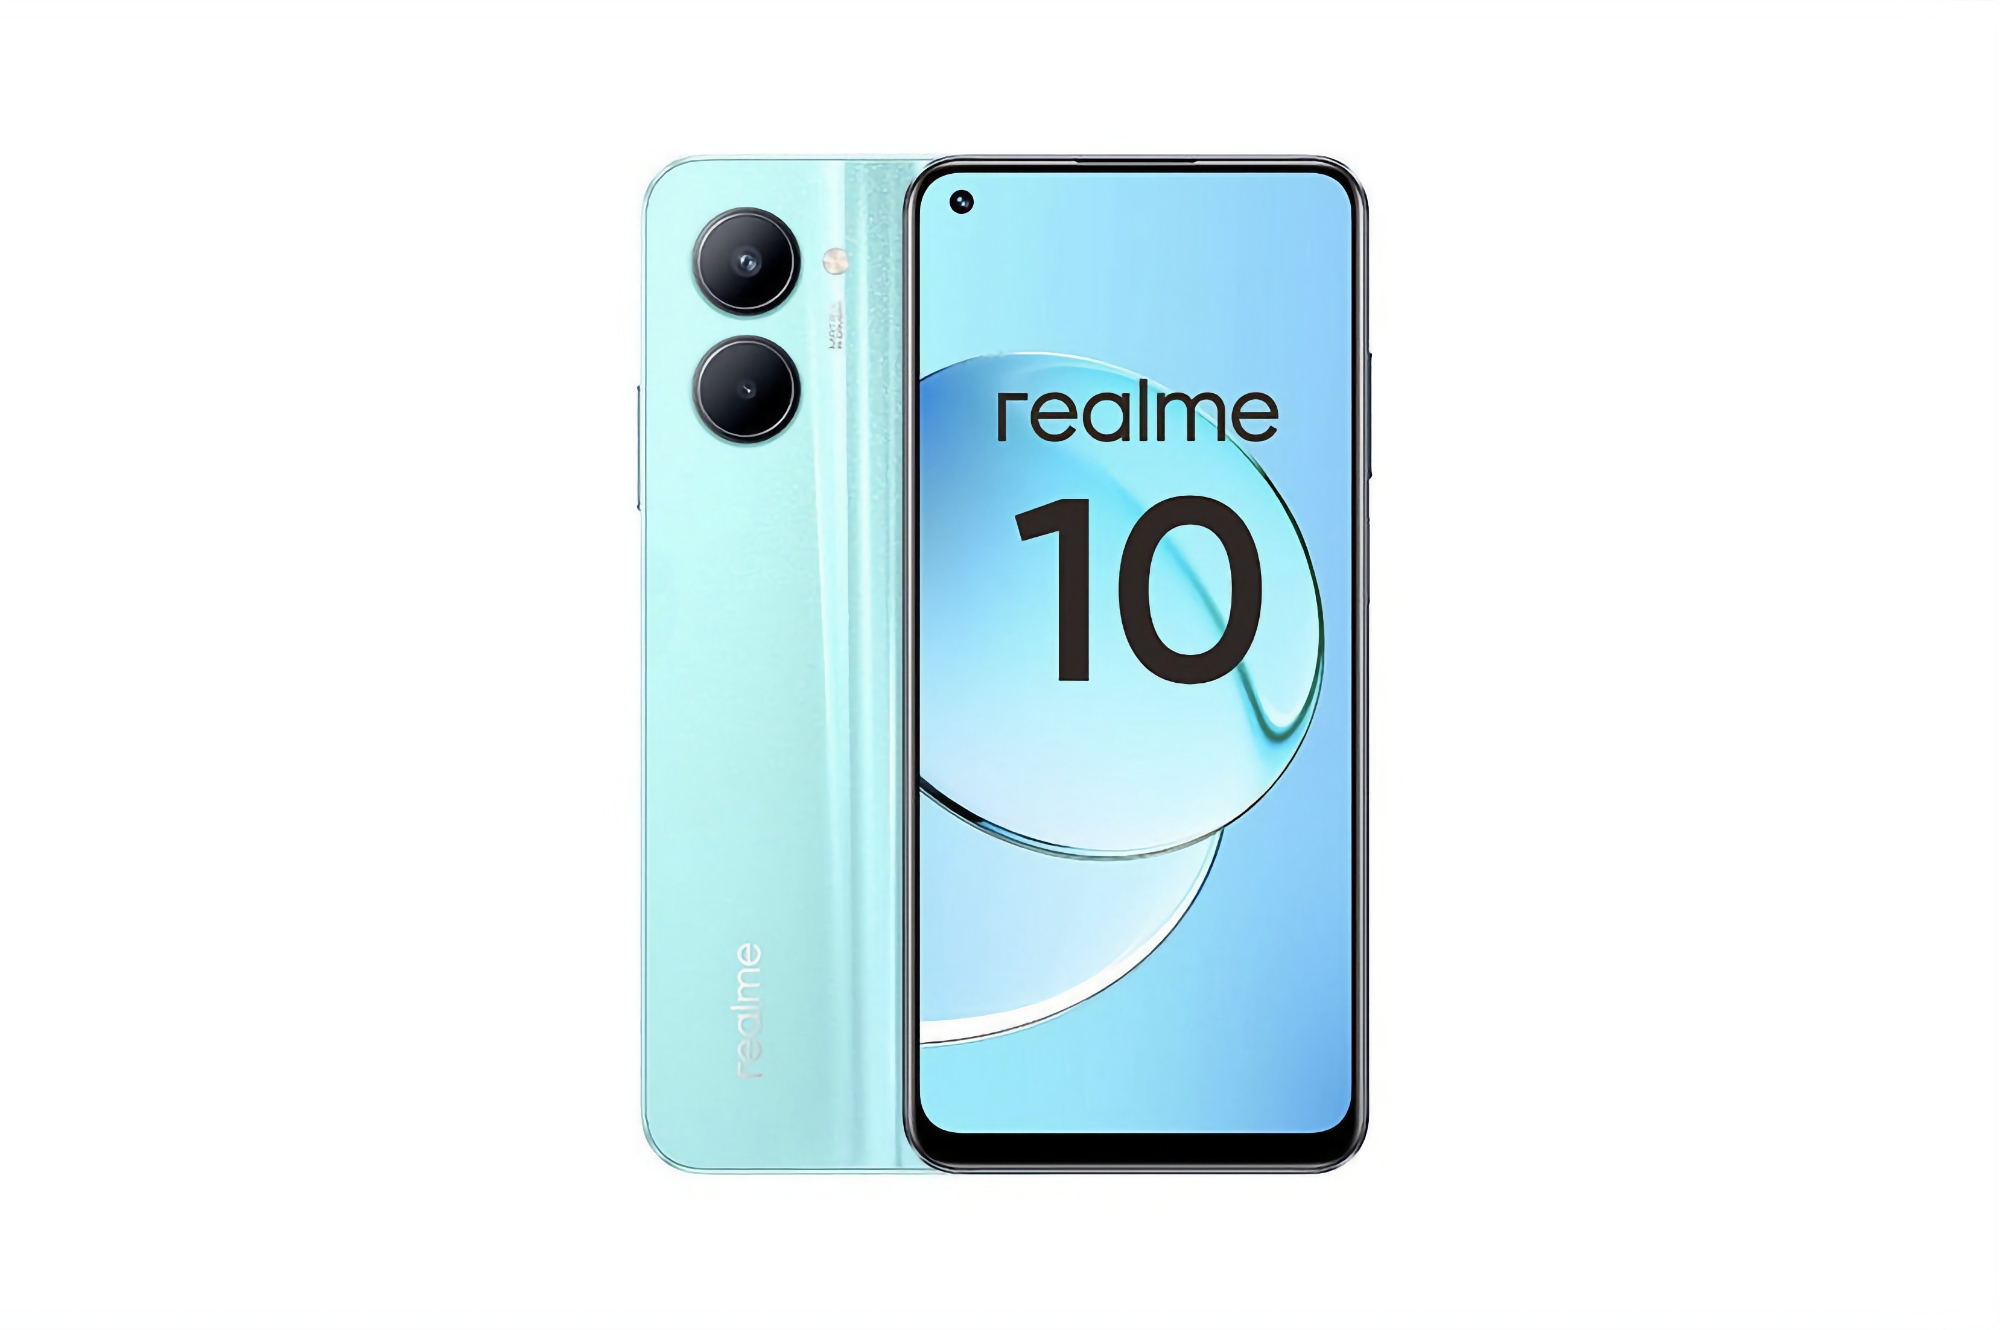 It's official: realme 10 4G with AMOLED screen, MediaTek Helio G99 chip and 5000 mAh battery will be presented on November 9